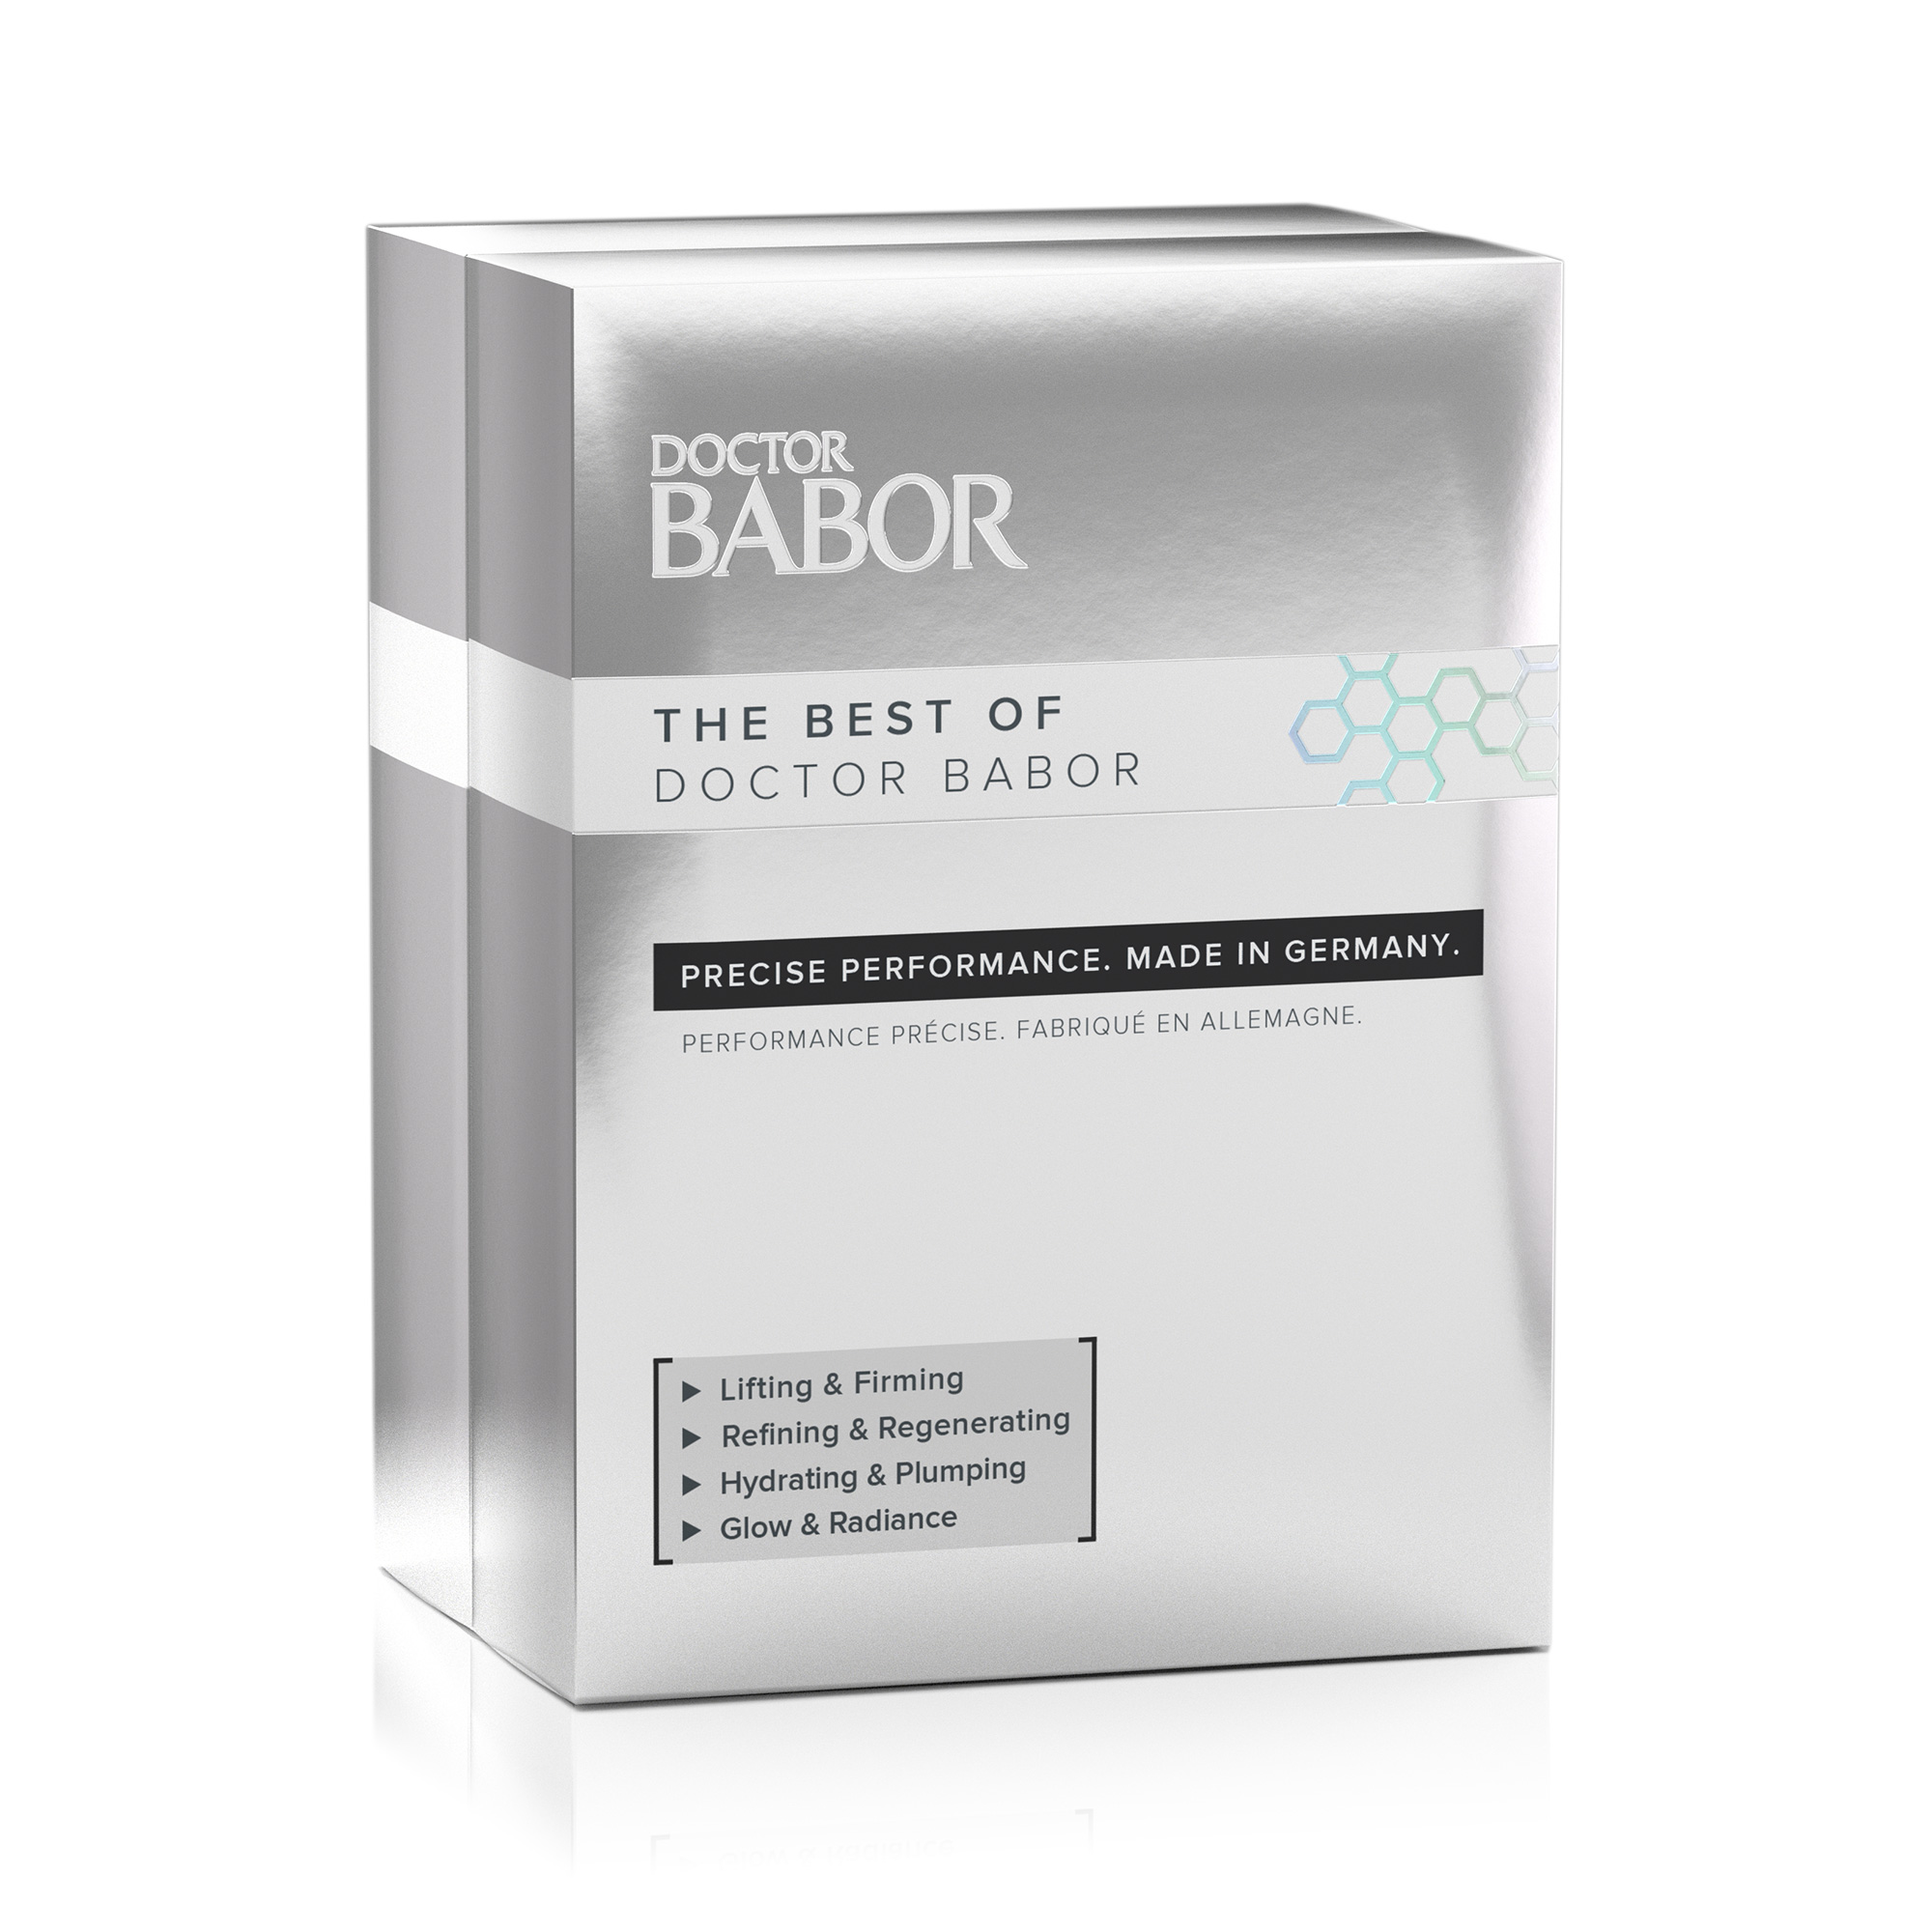  The Best of DOCTOR BABOR - Die Limited Edition